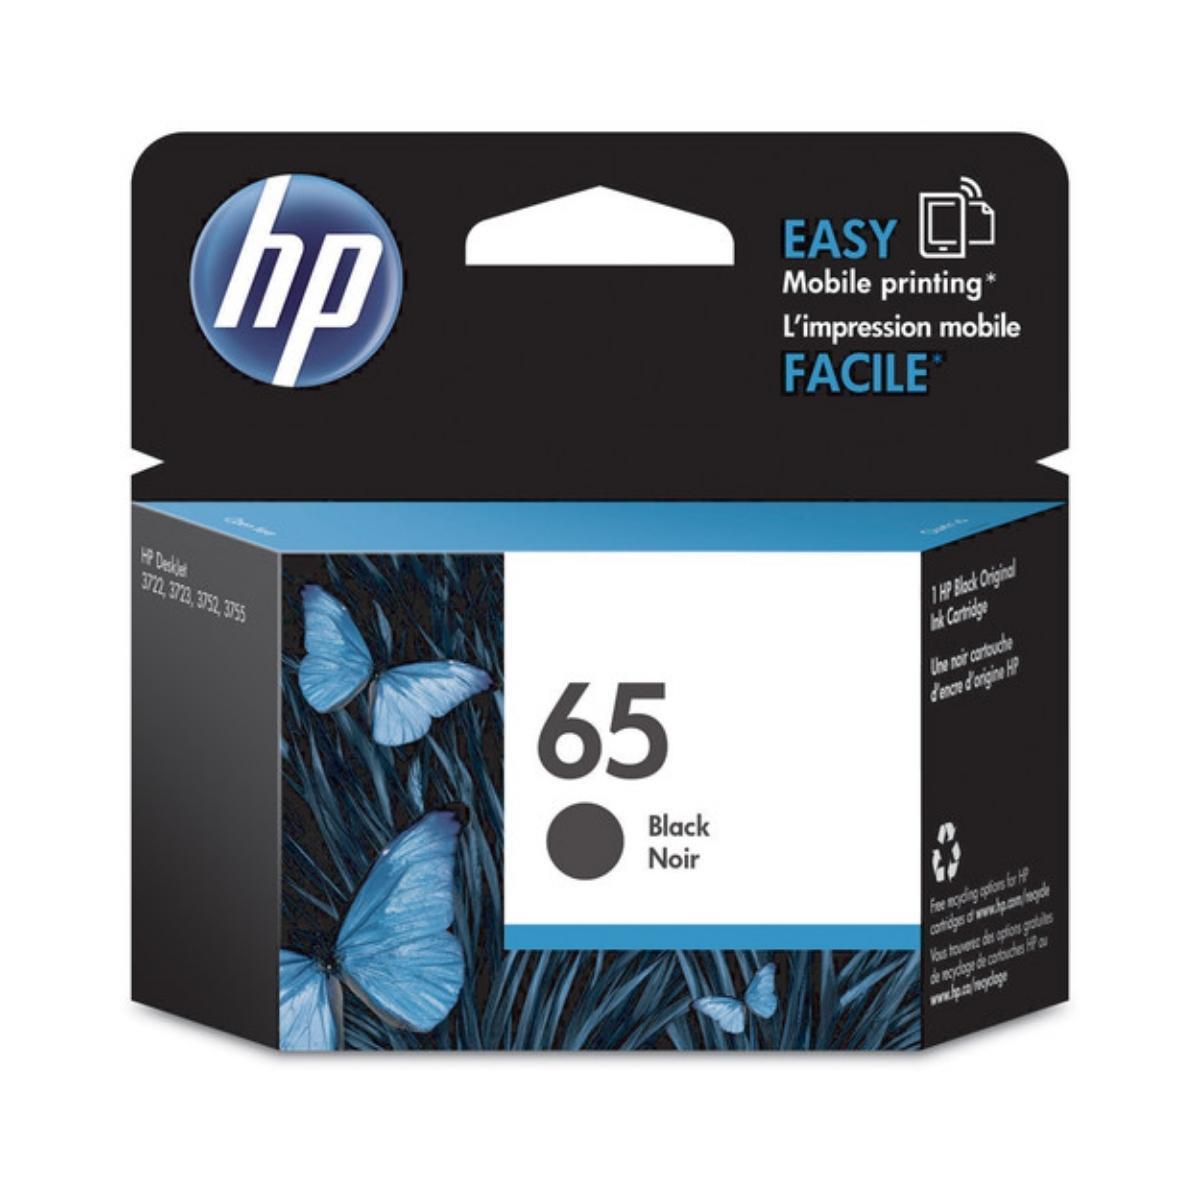 Image of HP 65 Black Original Ink Cartridge for DeskJet 3752 and 3755 All-in-One Printers